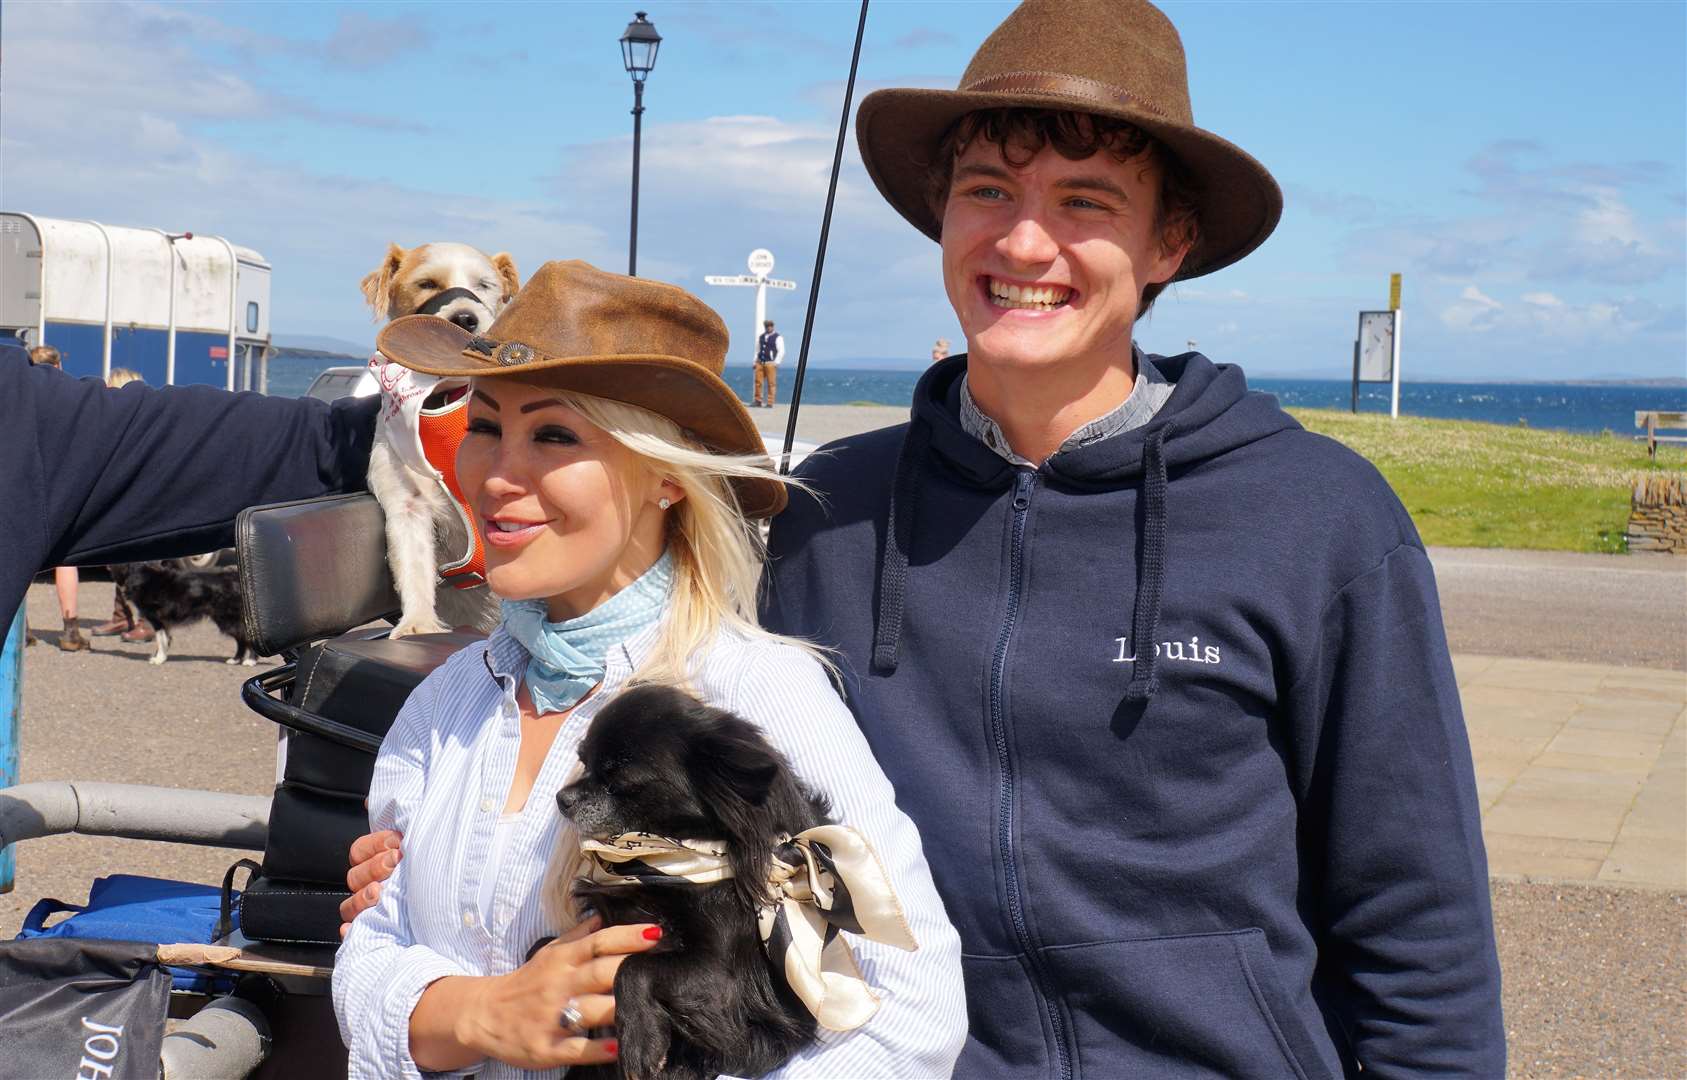 Natalie Oag met Louis Hall and introduced him to her pet Chihuahua who is also called Louis. Picture: DGS